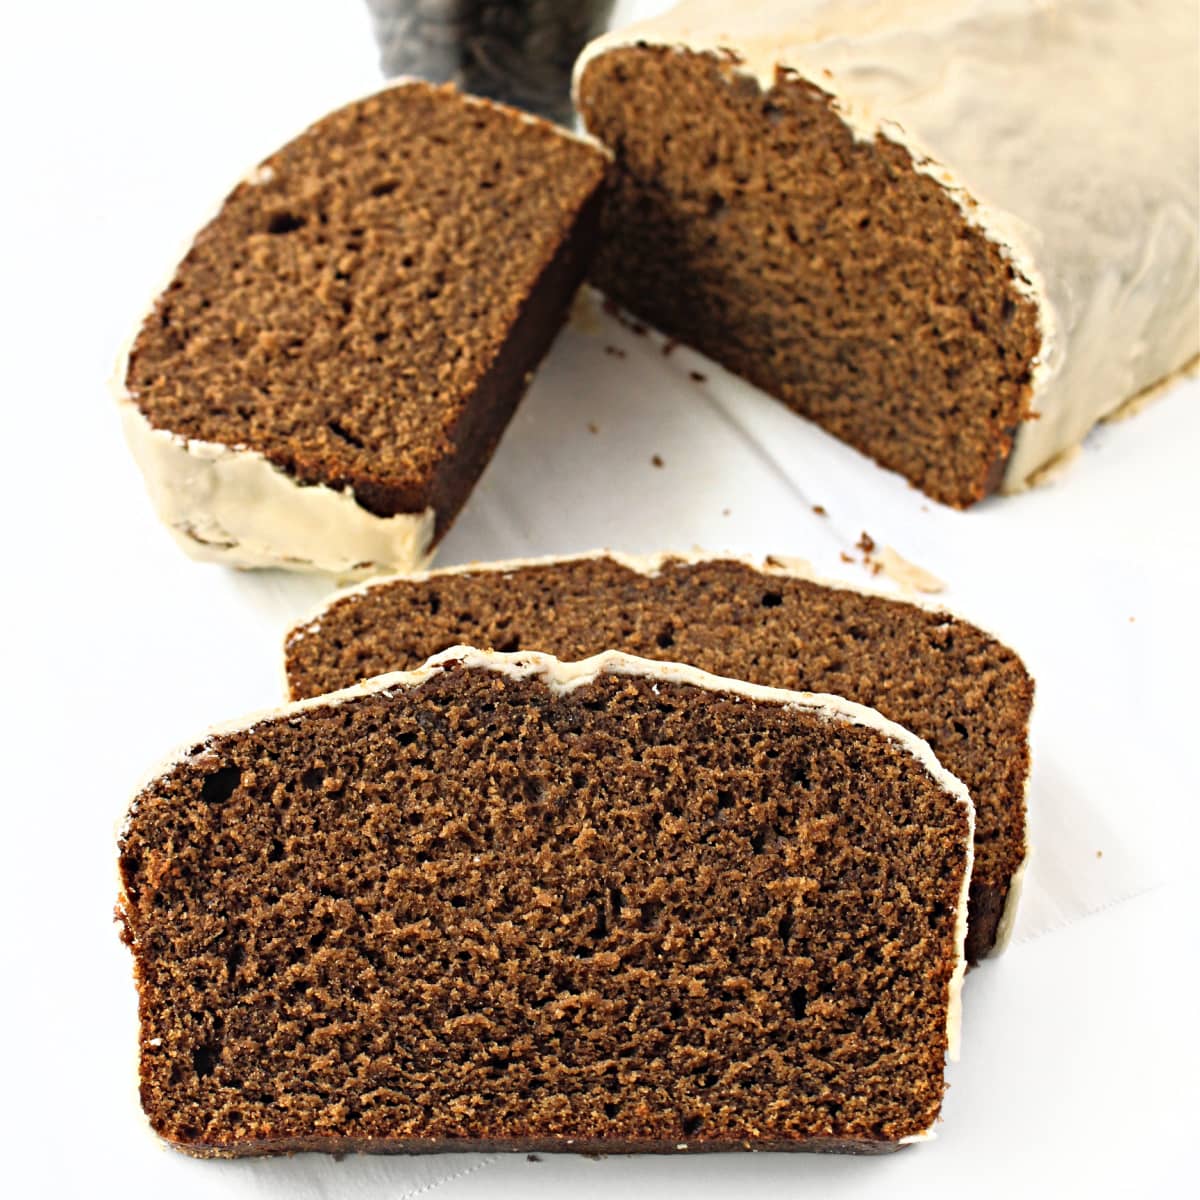 Closeup slices of sliced coffee loaf showing soft crumb.